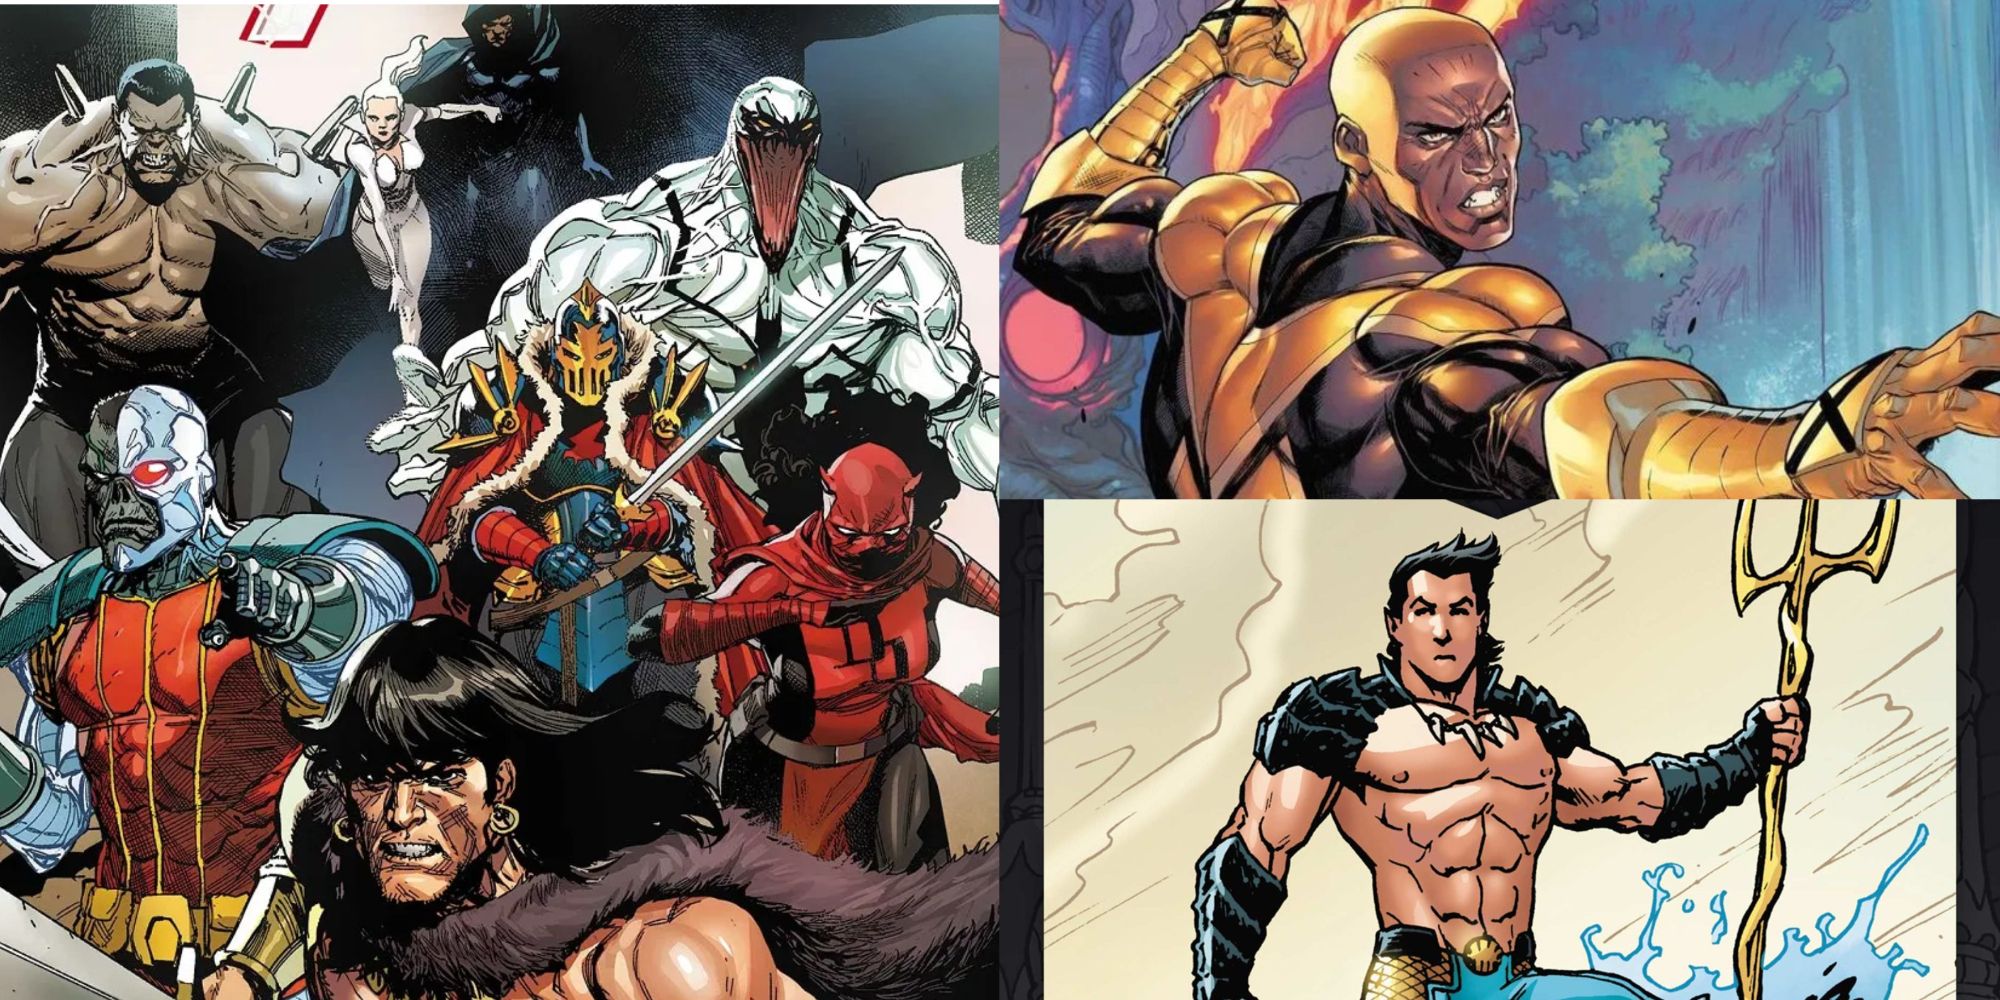 Clockwise from left: the Savage Avengers, Synch, and Namor in Marvel Comics